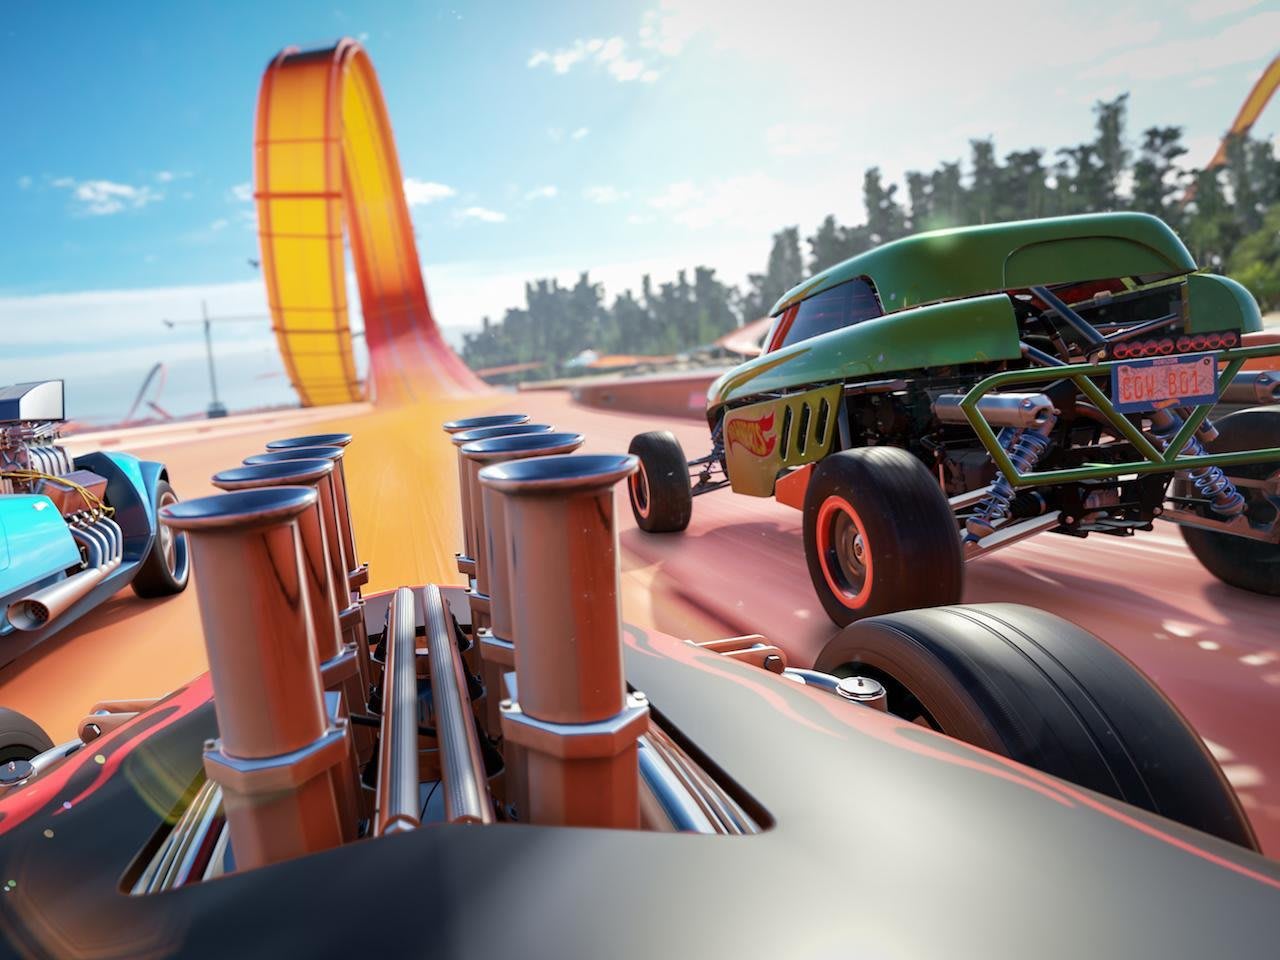 Forza Horizon 3 PC Requirements Announced